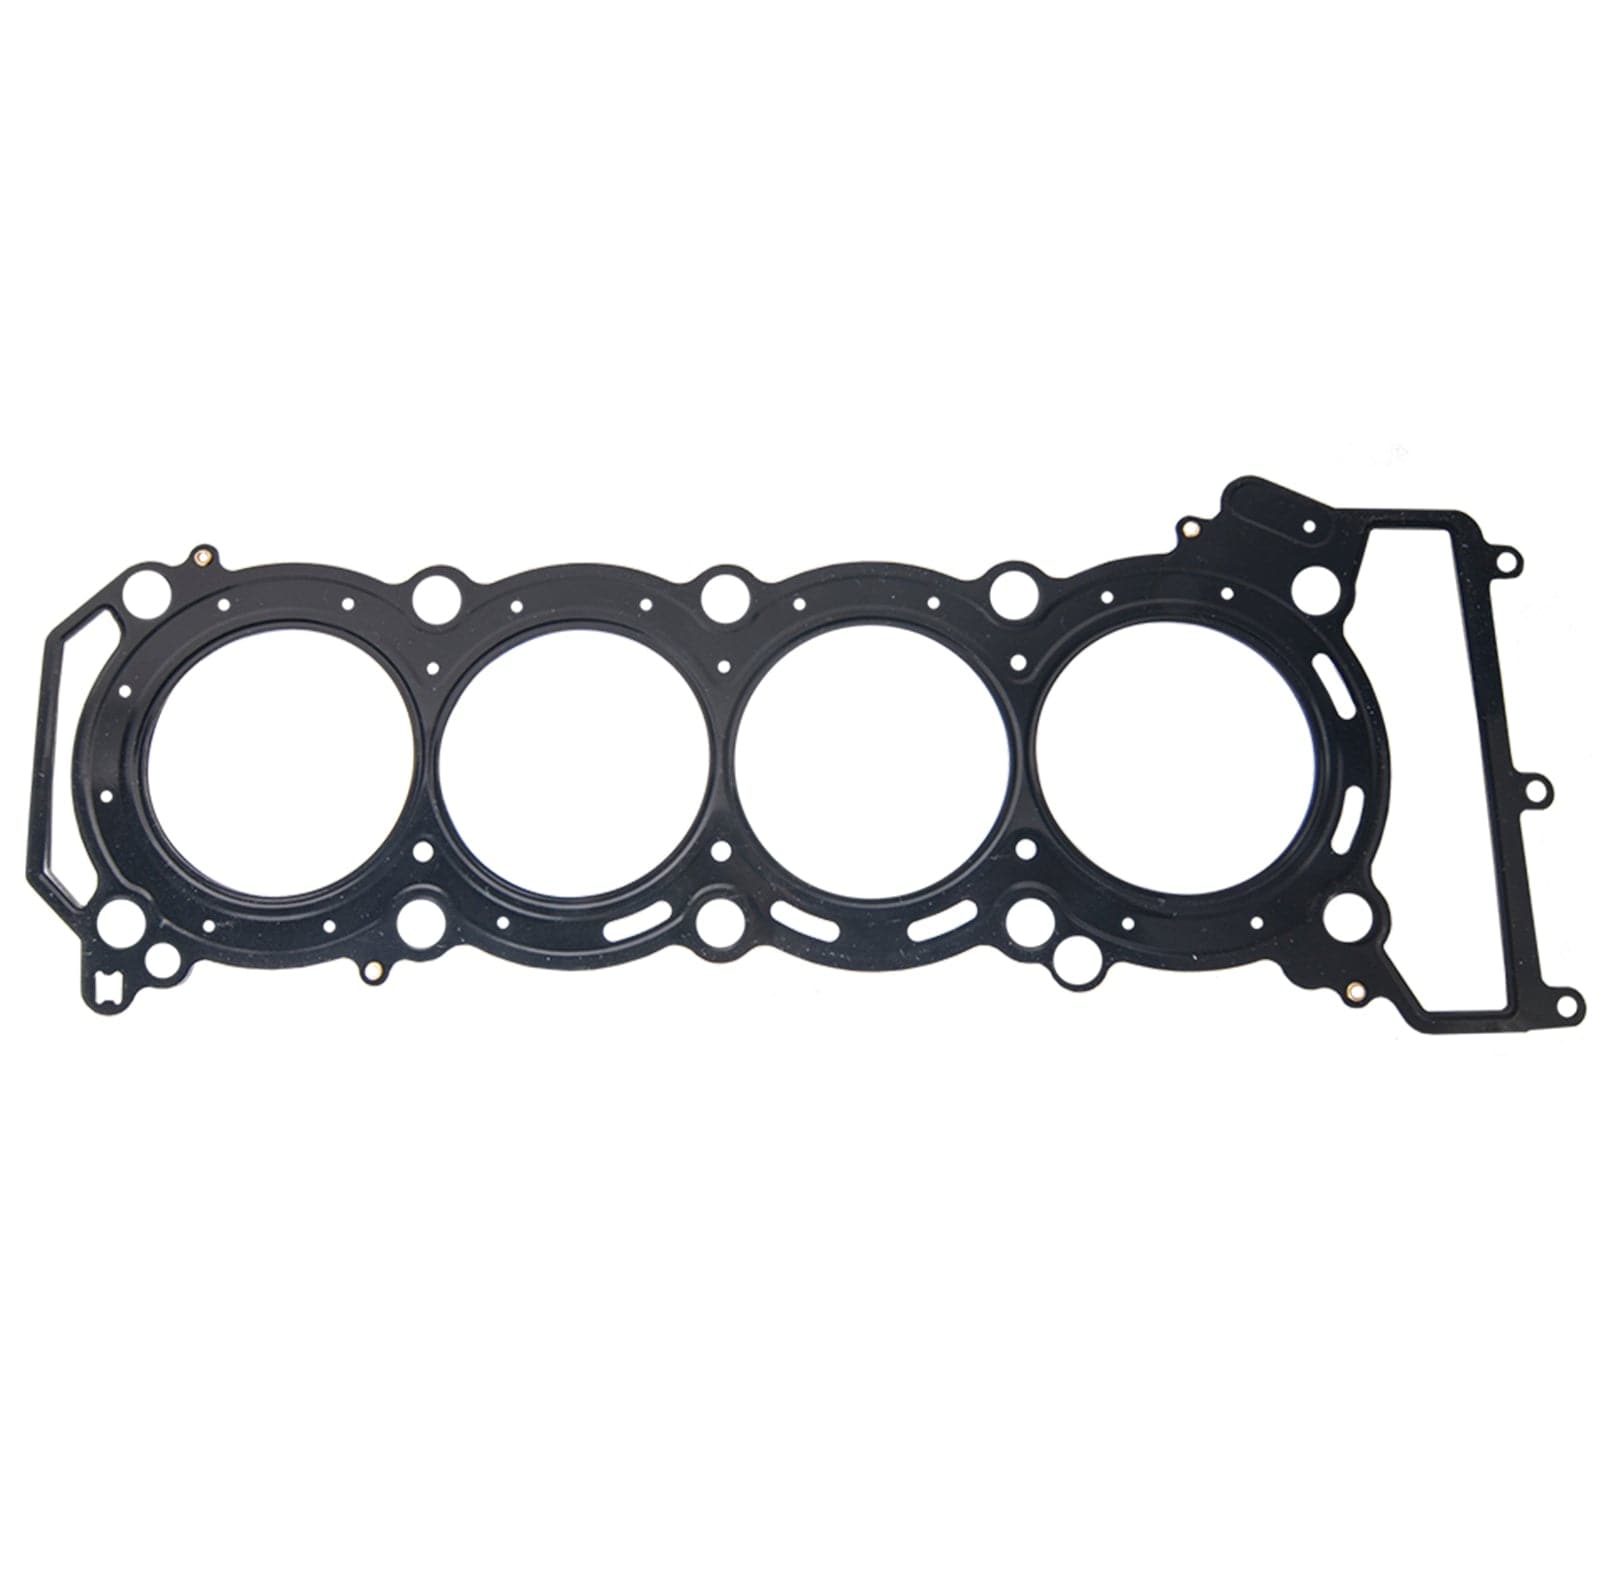 New OEM replacement 1.8L Head Gasket for 6BH-11181-00-00